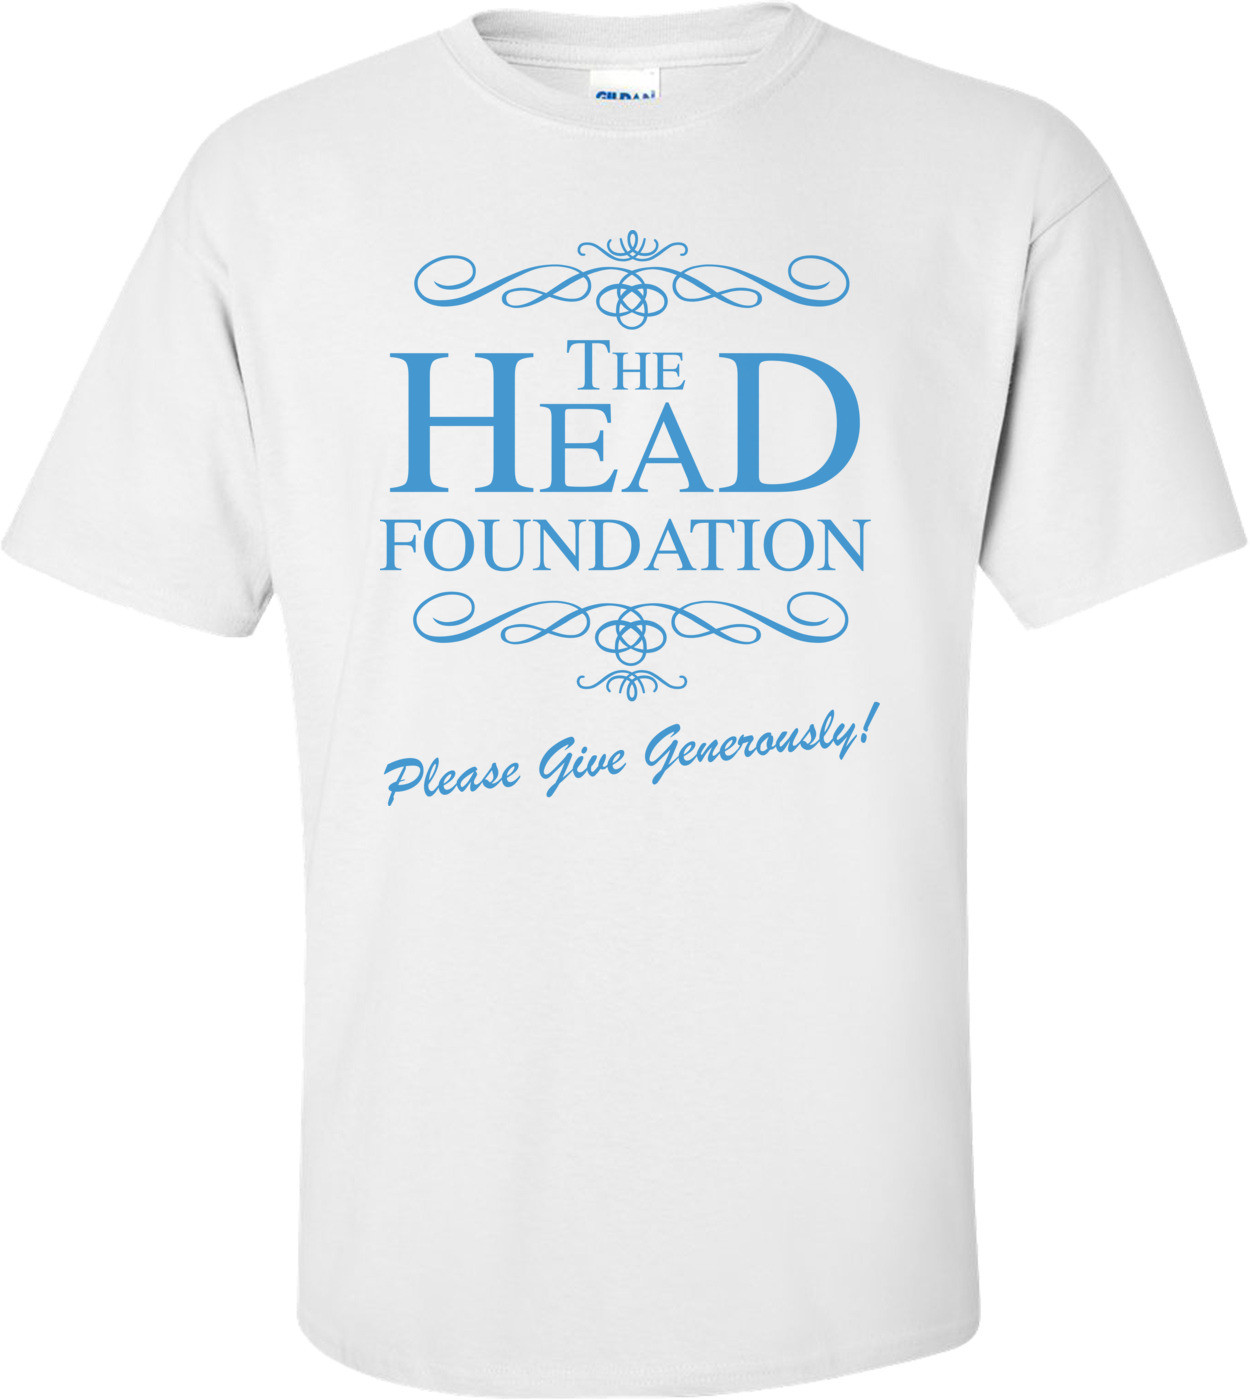 The Head Foundation Please Give Generously T-shirt 